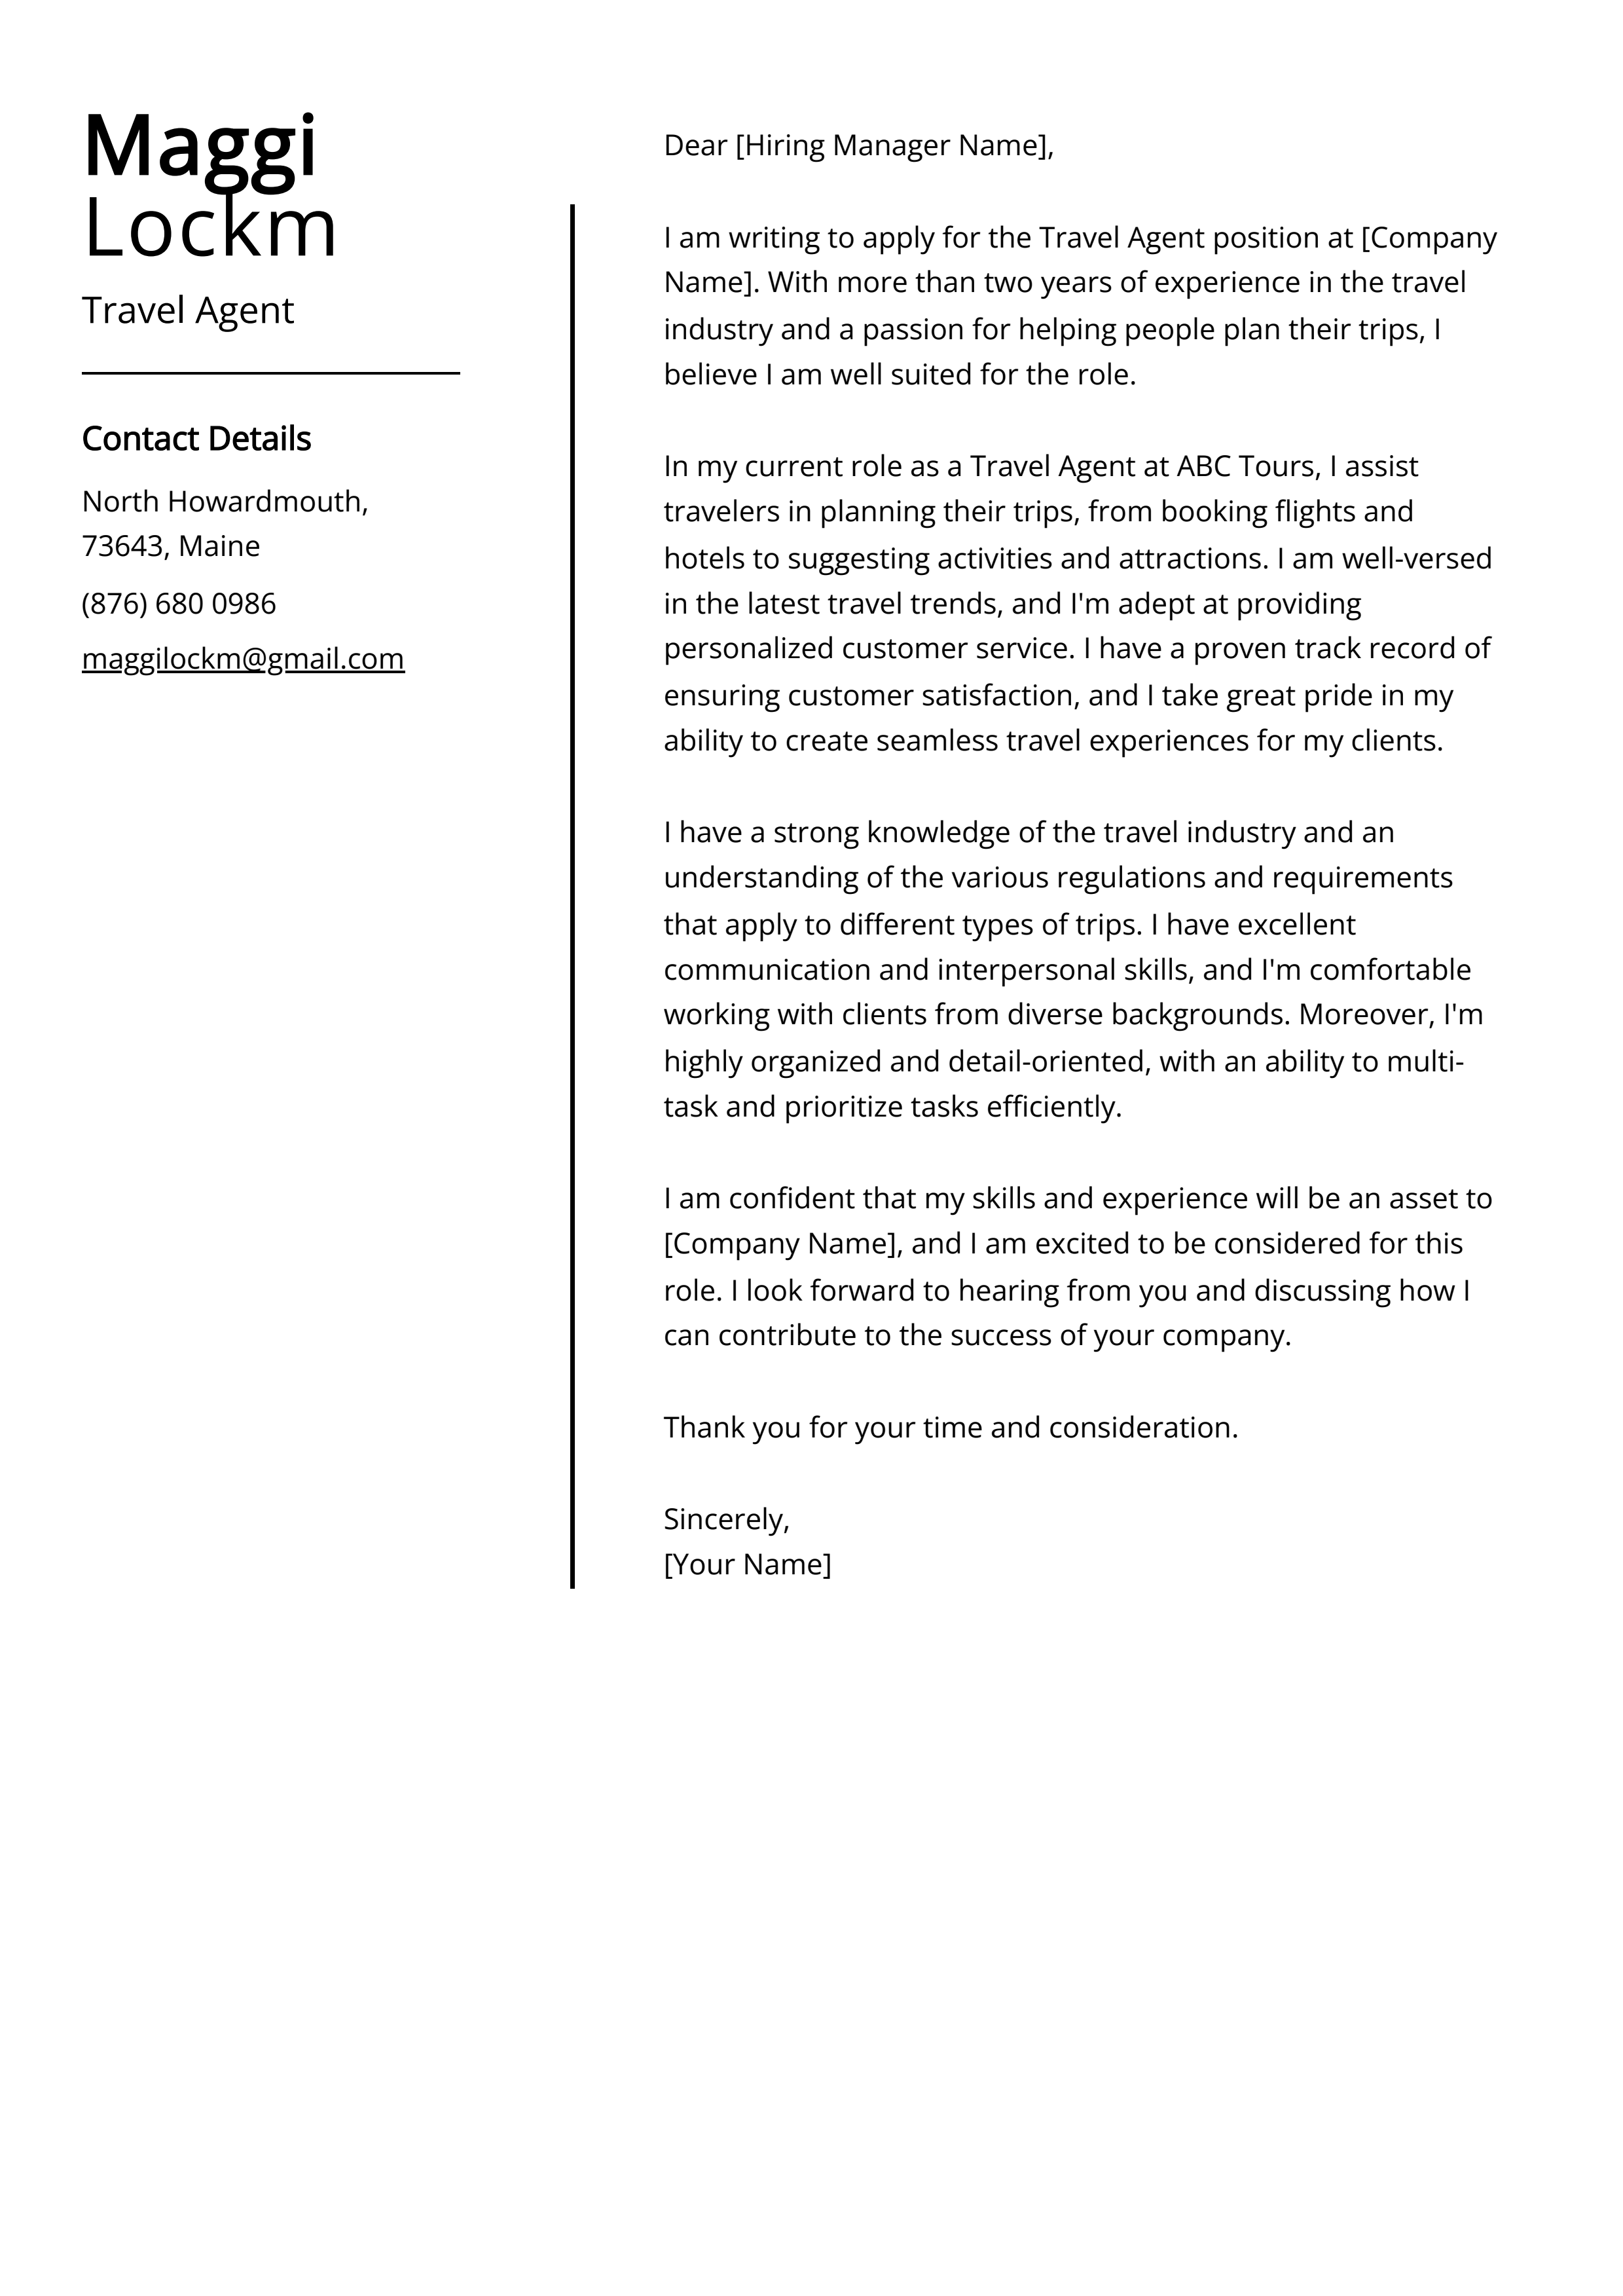 Travel Agent Cover Letter Example